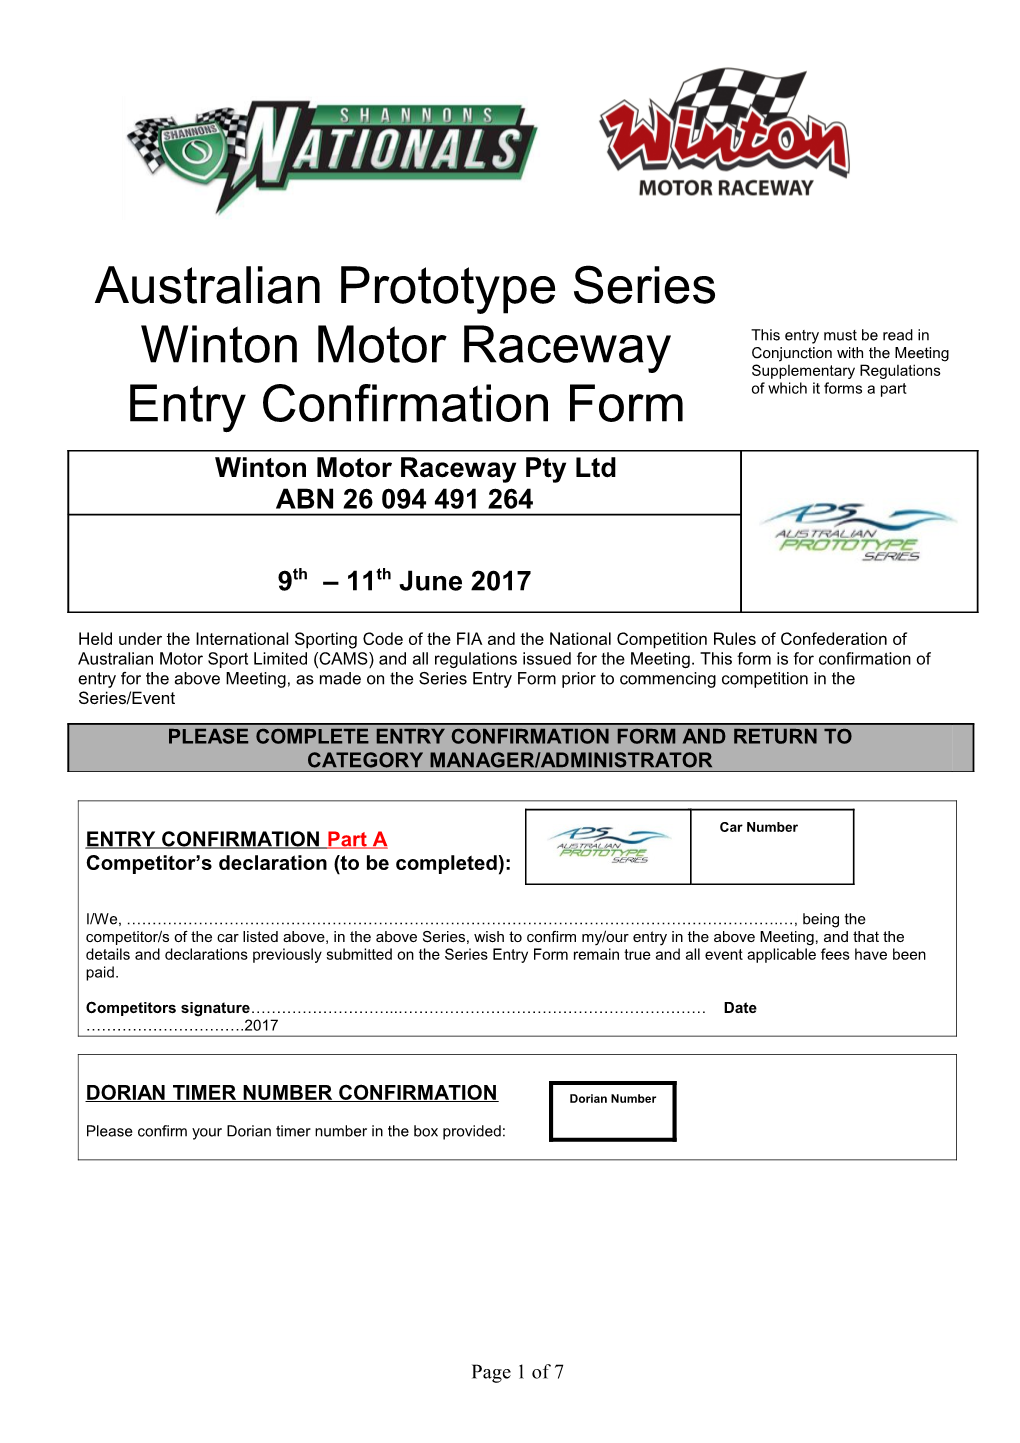 Entry Confirmation Form